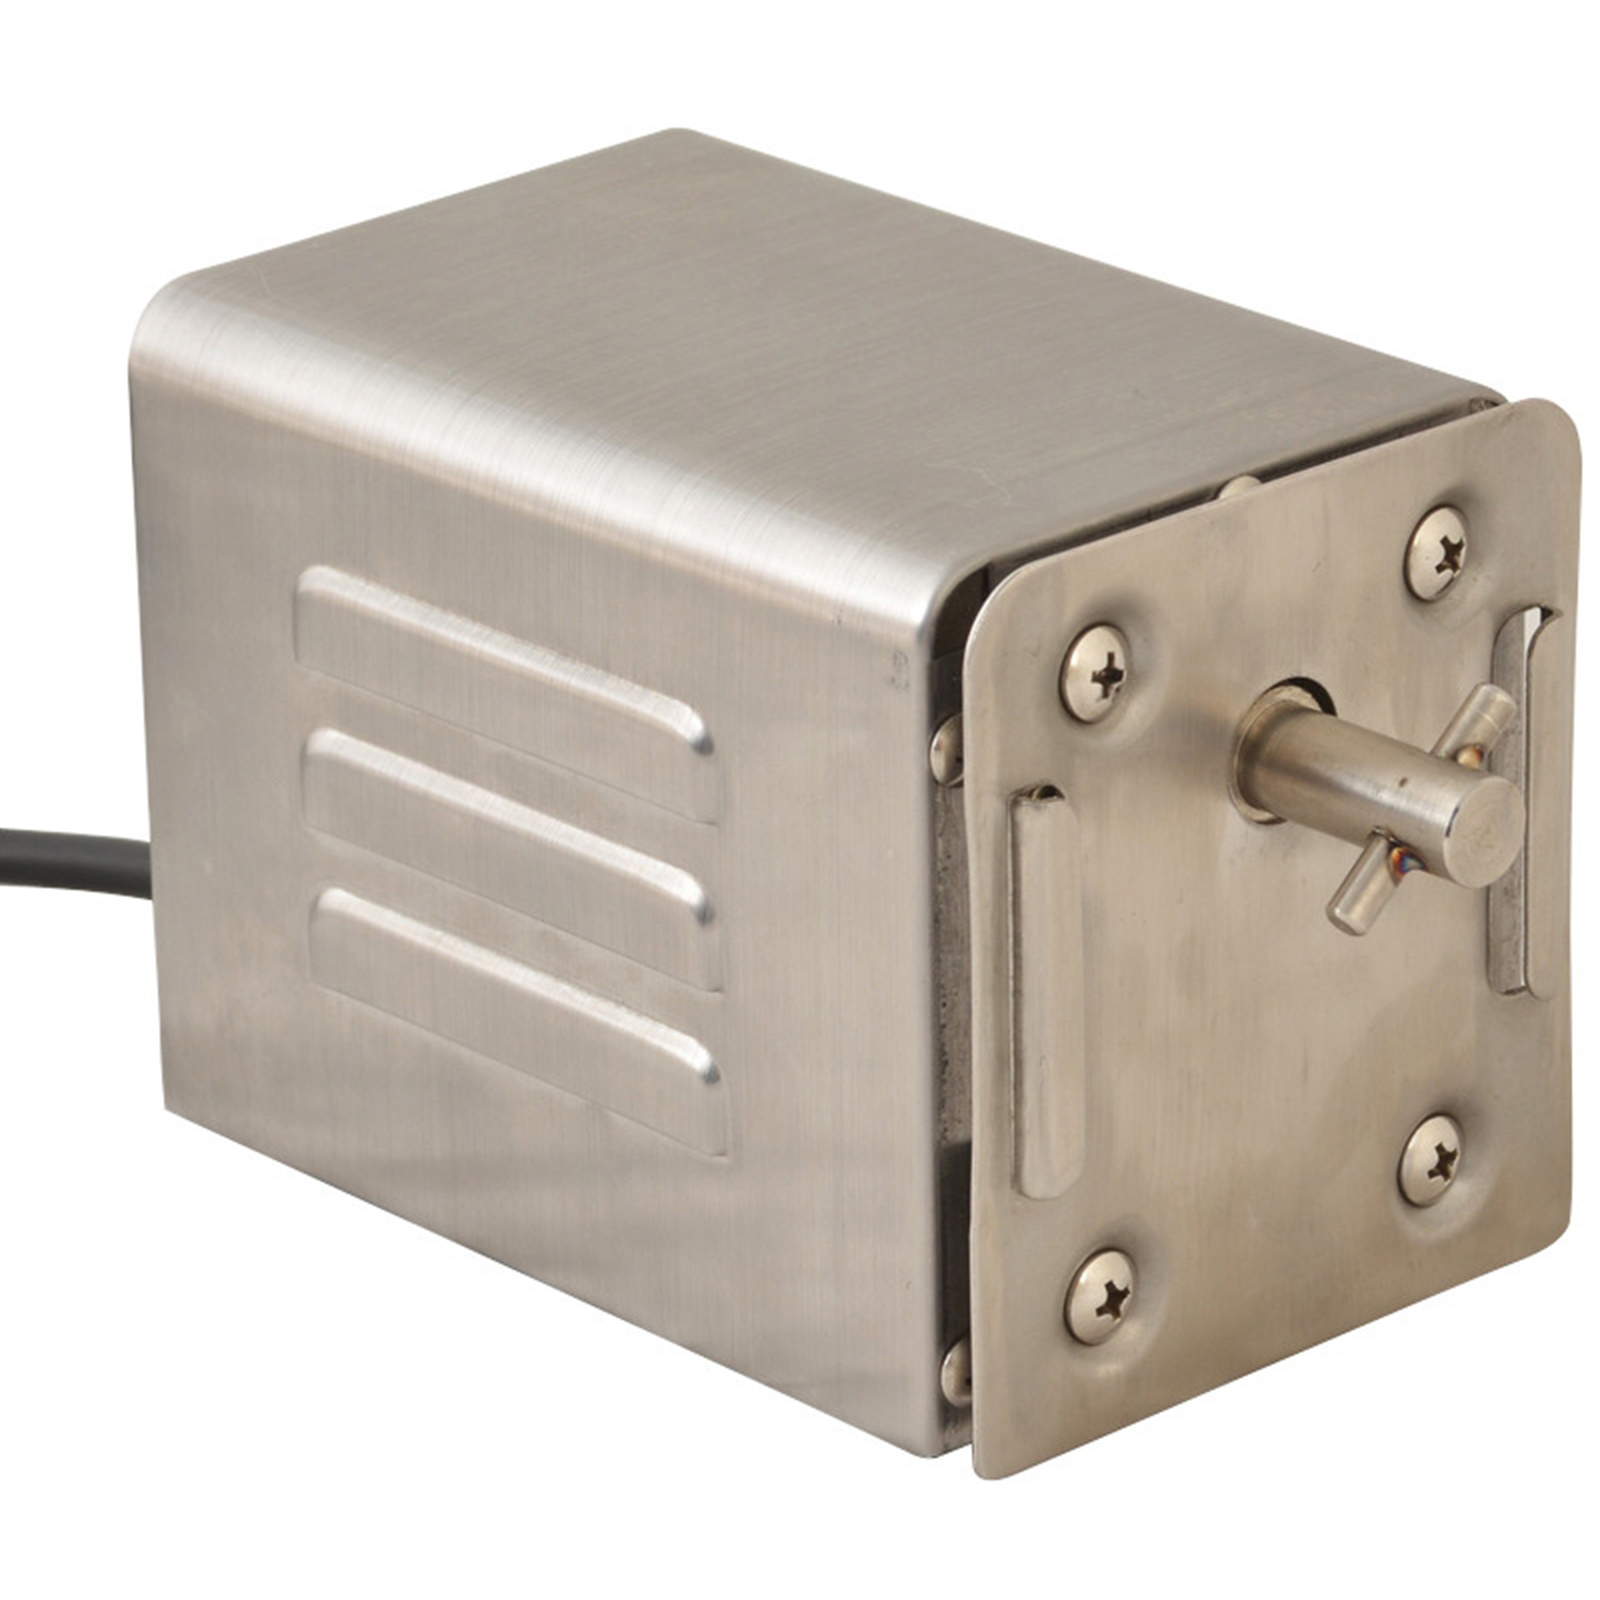 A40 Stainless Steel Rotisserie BBQ Spit 240V Motor with Pin-30kgs Capacity from DIZZY LAMB